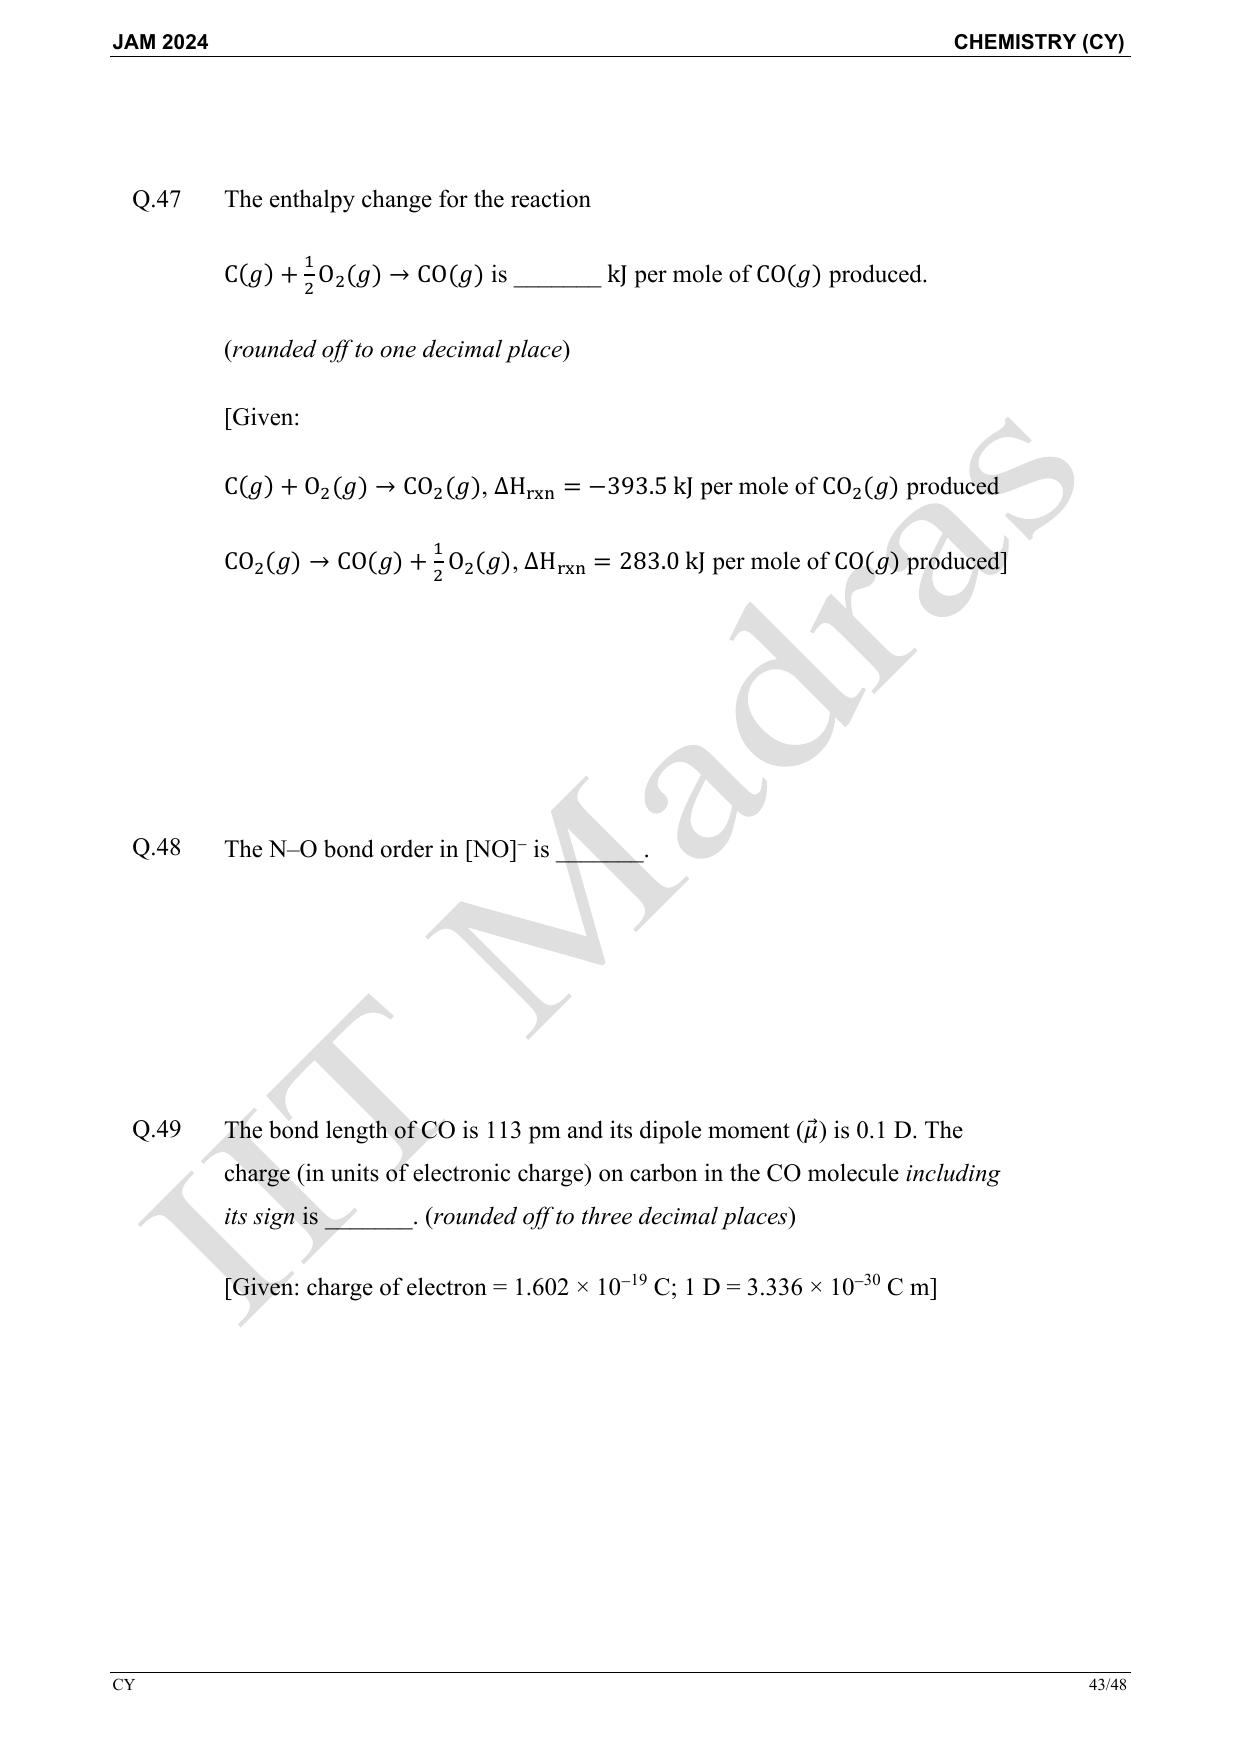 IIT JAM 2024 Chemistry (CY) Master Question Paper - Page 43